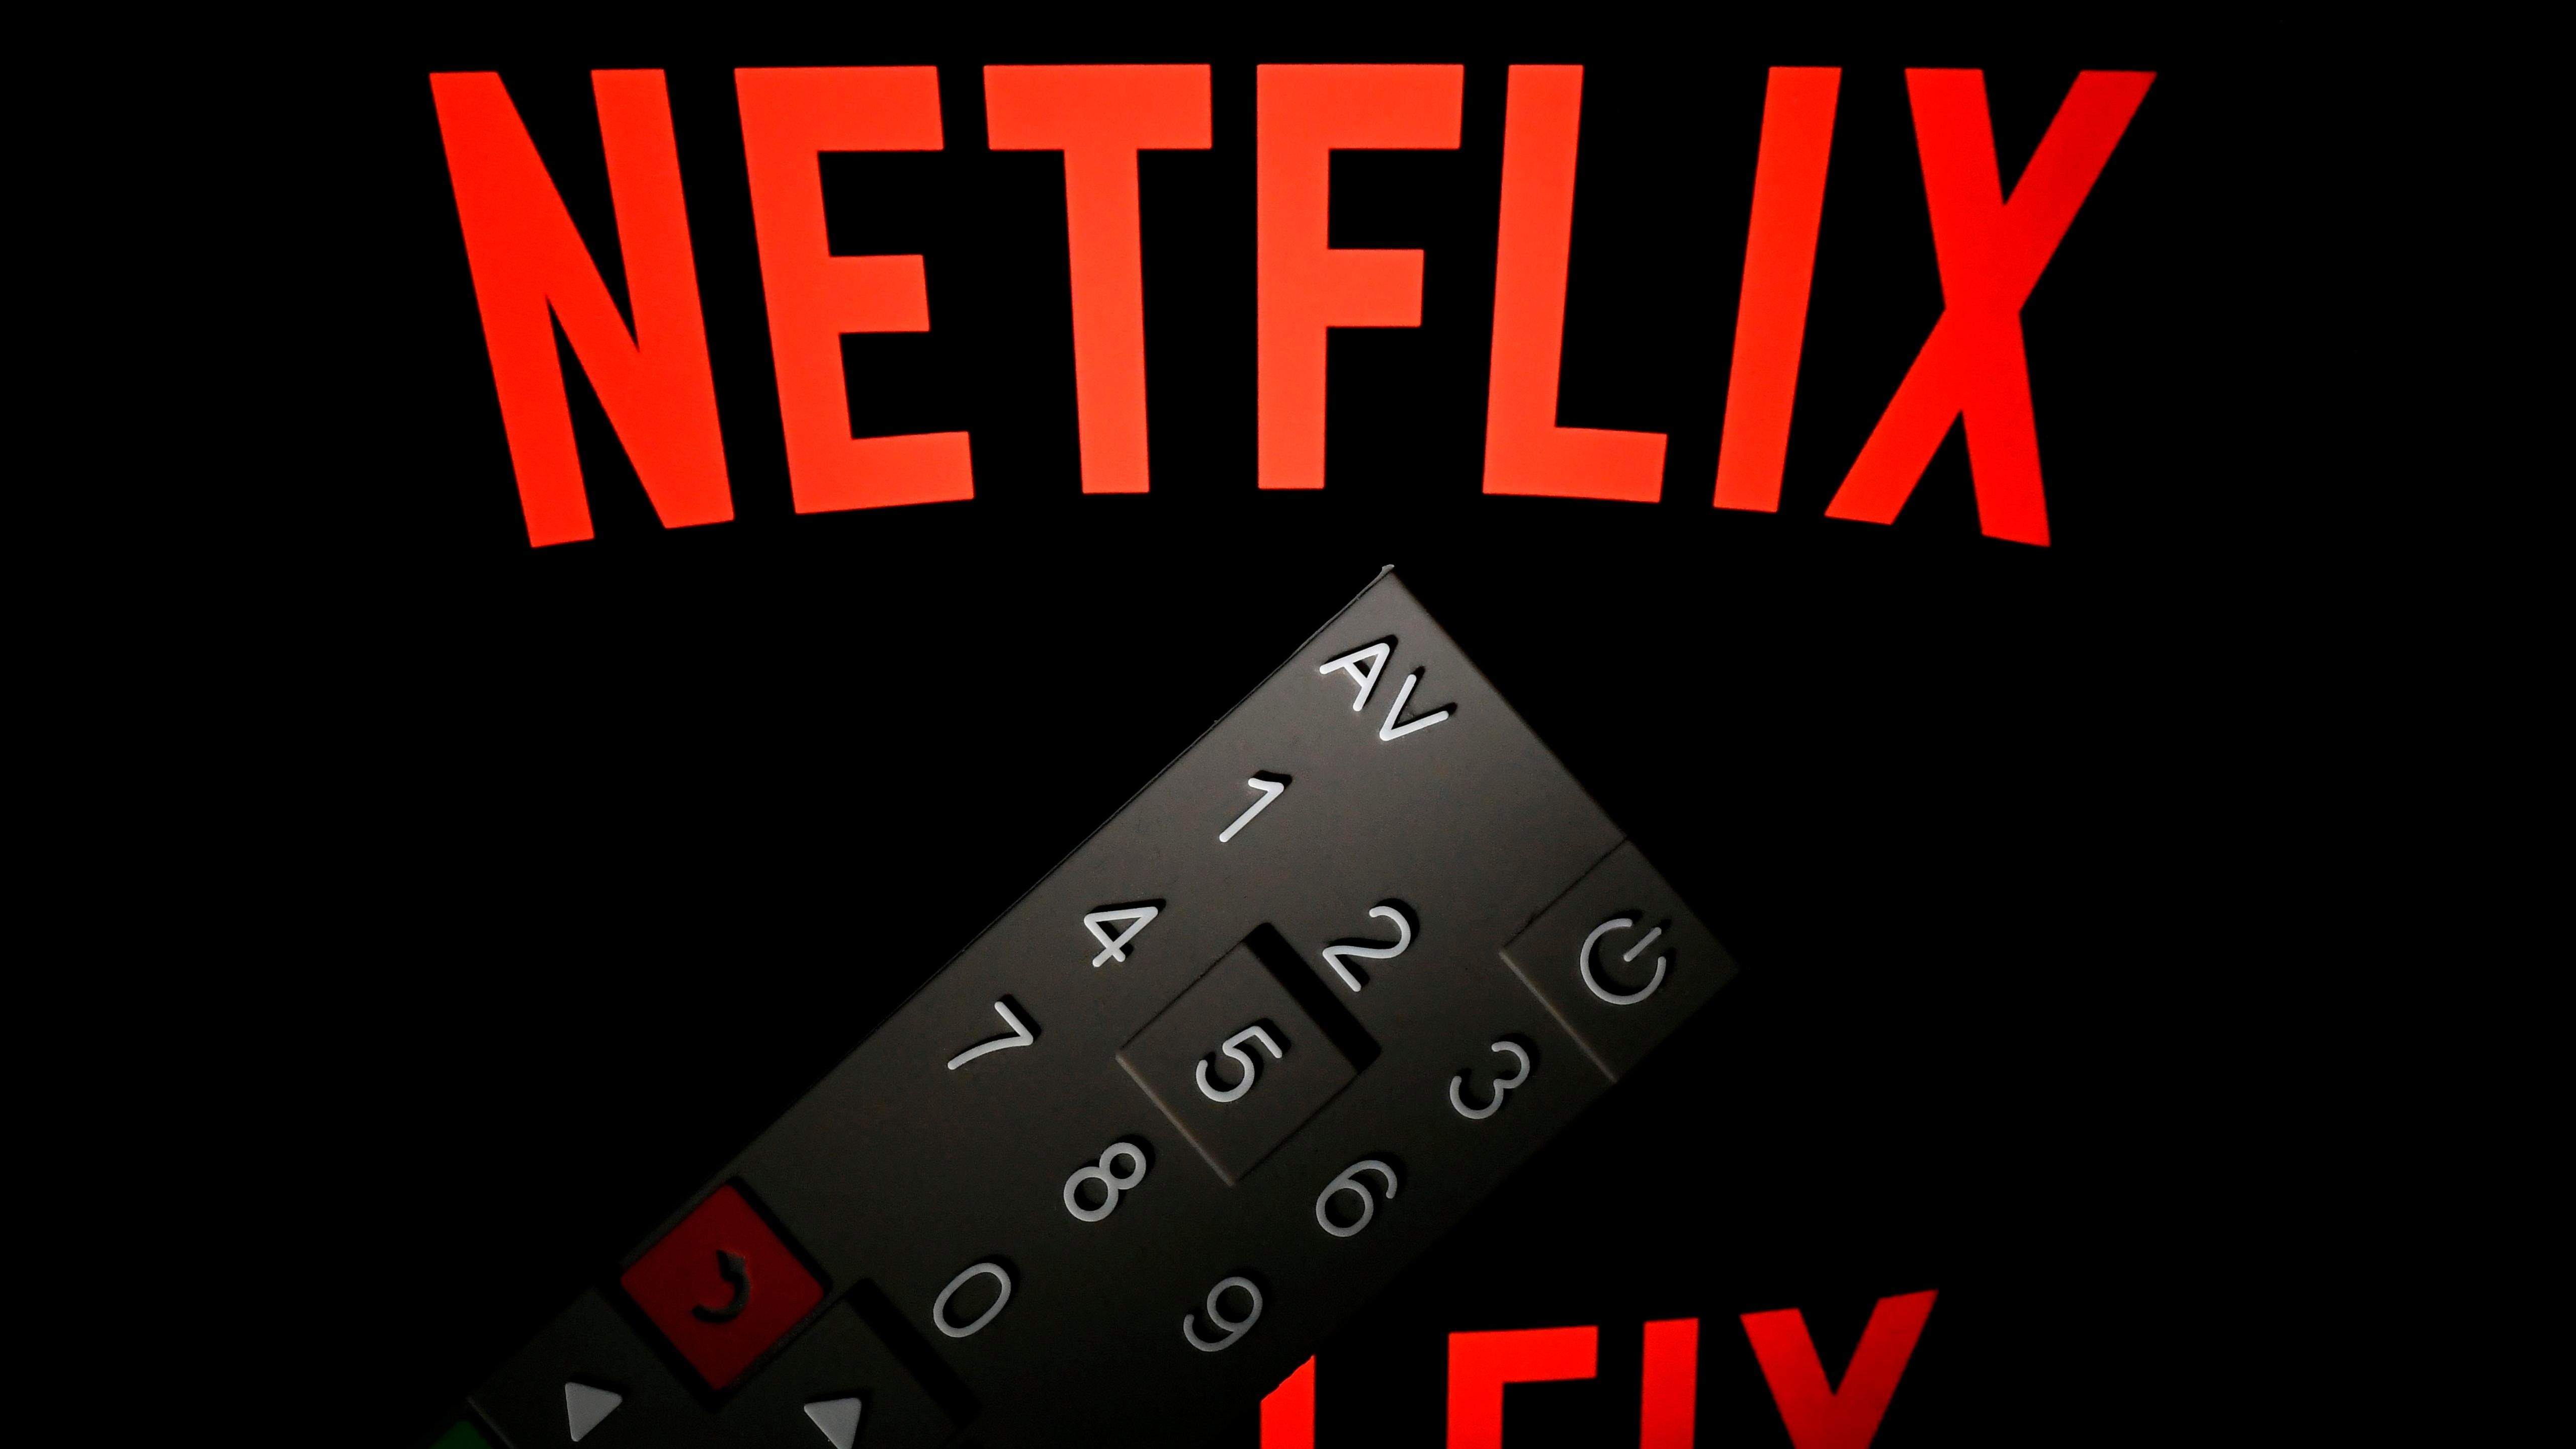 Netflix is trying to stop people from sharing passwords by testing out a charge for additional users